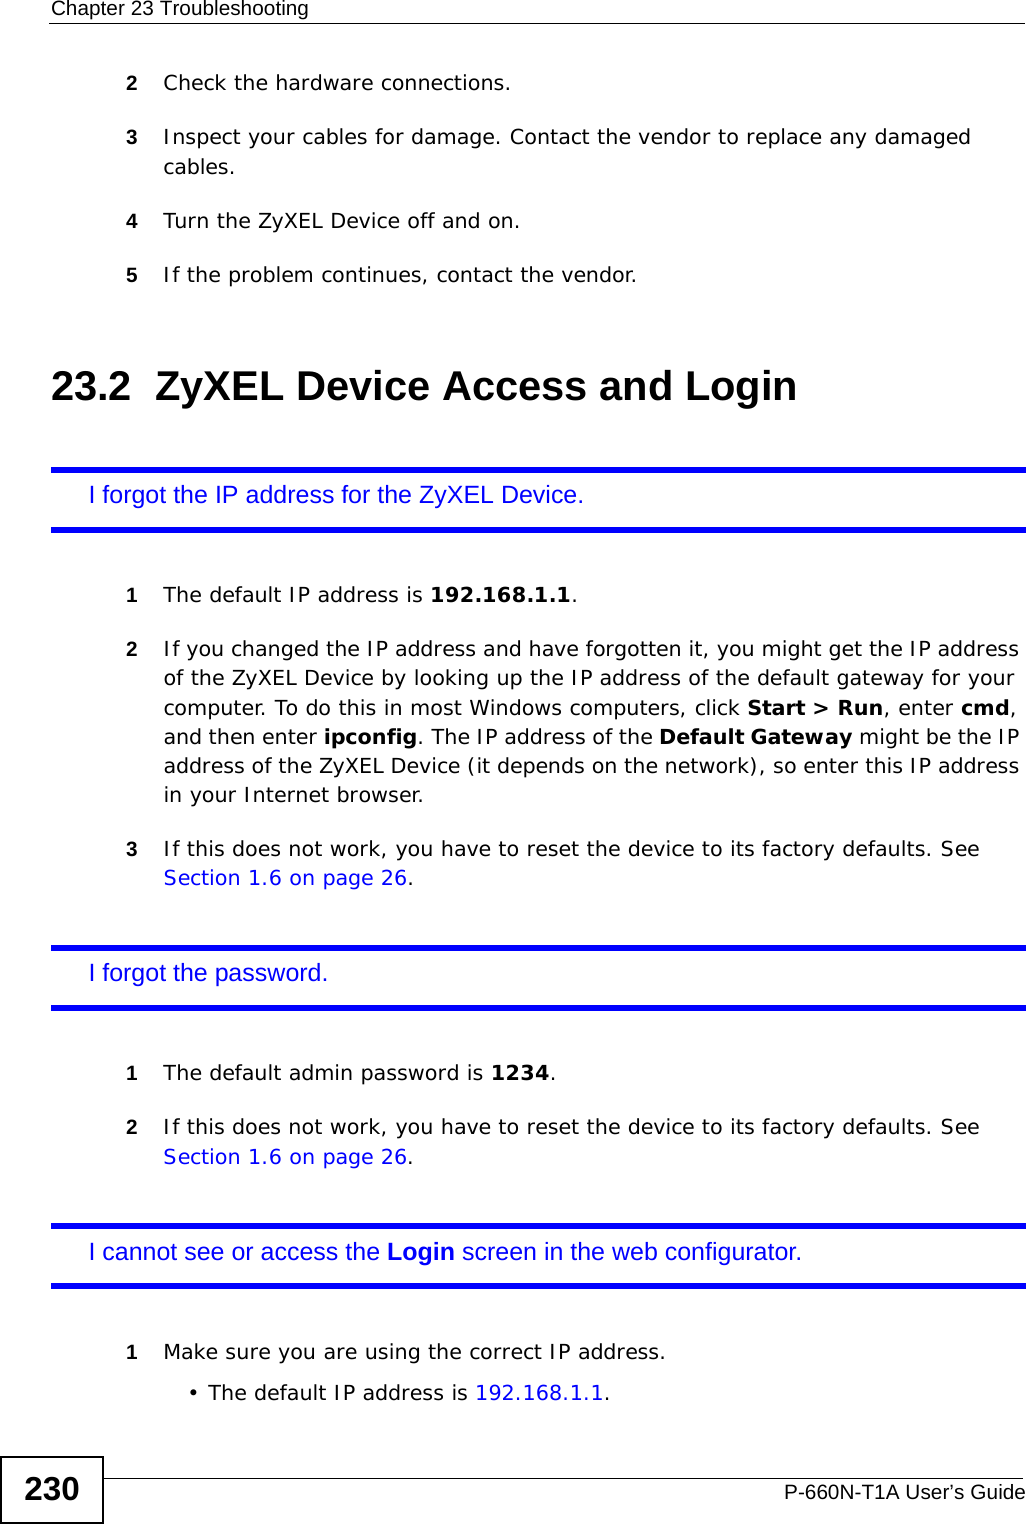 Chapter 23 TroubleshootingP-660N-T1A User’s Guide2302Check the hardware connections.3Inspect your cables for damage. Contact the vendor to replace any damaged cables.4Turn the ZyXEL Device off and on.5If the problem continues, contact the vendor.23.2  ZyXEL Device Access and LoginI forgot the IP address for the ZyXEL Device.1The default IP address is 192.168.1.1.2If you changed the IP address and have forgotten it, you might get the IP address of the ZyXEL Device by looking up the IP address of the default gateway for your computer. To do this in most Windows computers, click Start &gt; Run, enter cmd, and then enter ipconfig. The IP address of the Default Gateway might be the IP address of the ZyXEL Device (it depends on the network), so enter this IP address in your Internet browser.3If this does not work, you have to reset the device to its factory defaults. See Section 1.6 on page 26.I forgot the password.1The default admin password is 1234.2If this does not work, you have to reset the device to its factory defaults. See Section 1.6 on page 26.I cannot see or access the Login screen in the web configurator.1Make sure you are using the correct IP address.• The default IP address is 192.168.1.1.